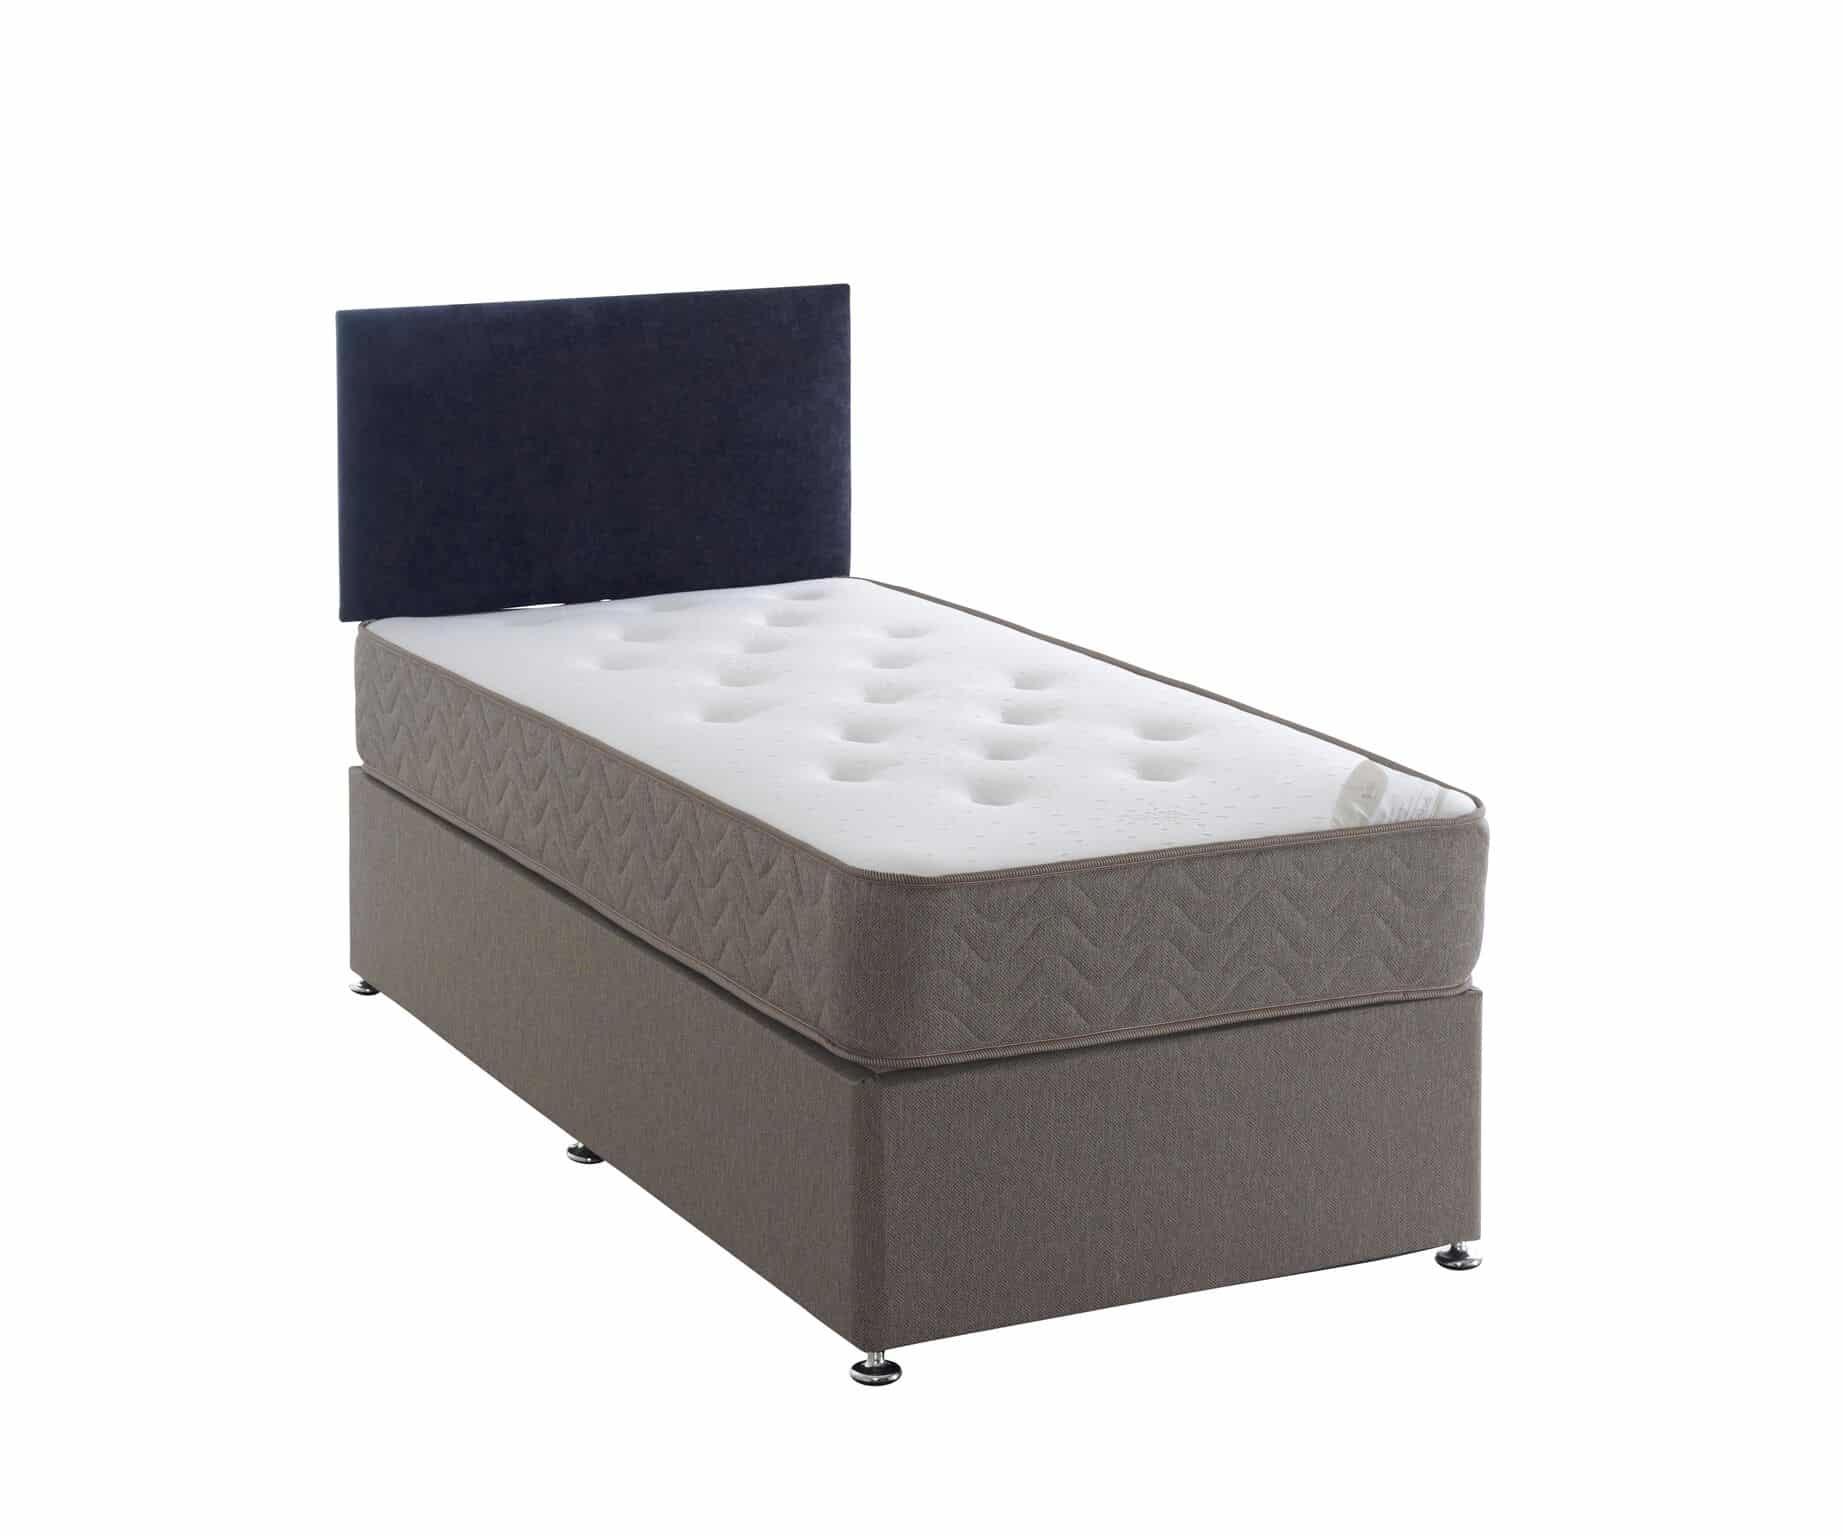 Dura Beds – Regal Divan Bed Set – Small Single – Divan Bed Base With Ortho Firm Coil Spring Unit Medium Firmness Mattress